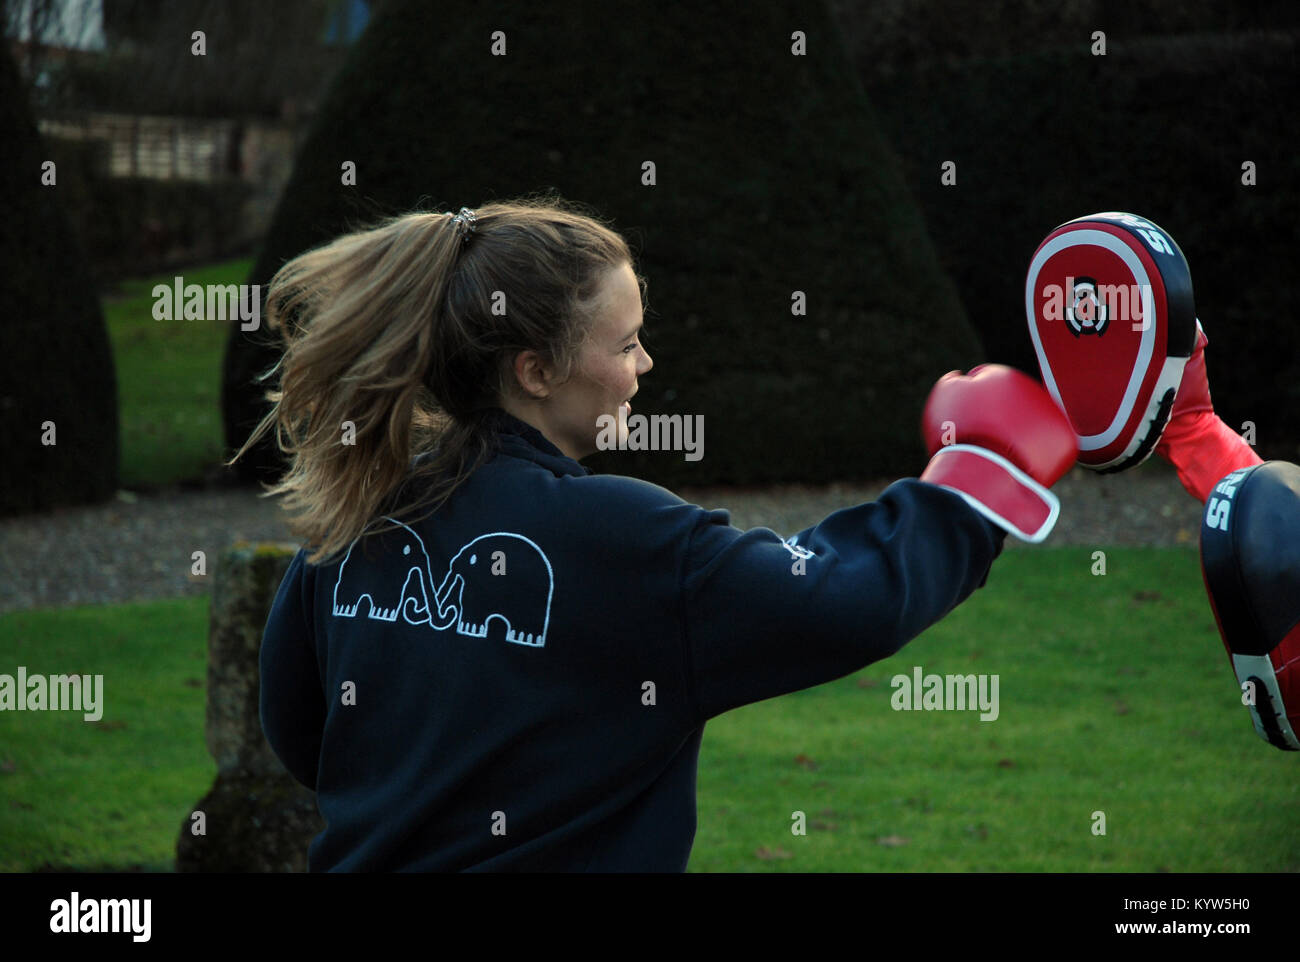 Attractive young woman practicing boxing outside throwing a punch Stock Photo